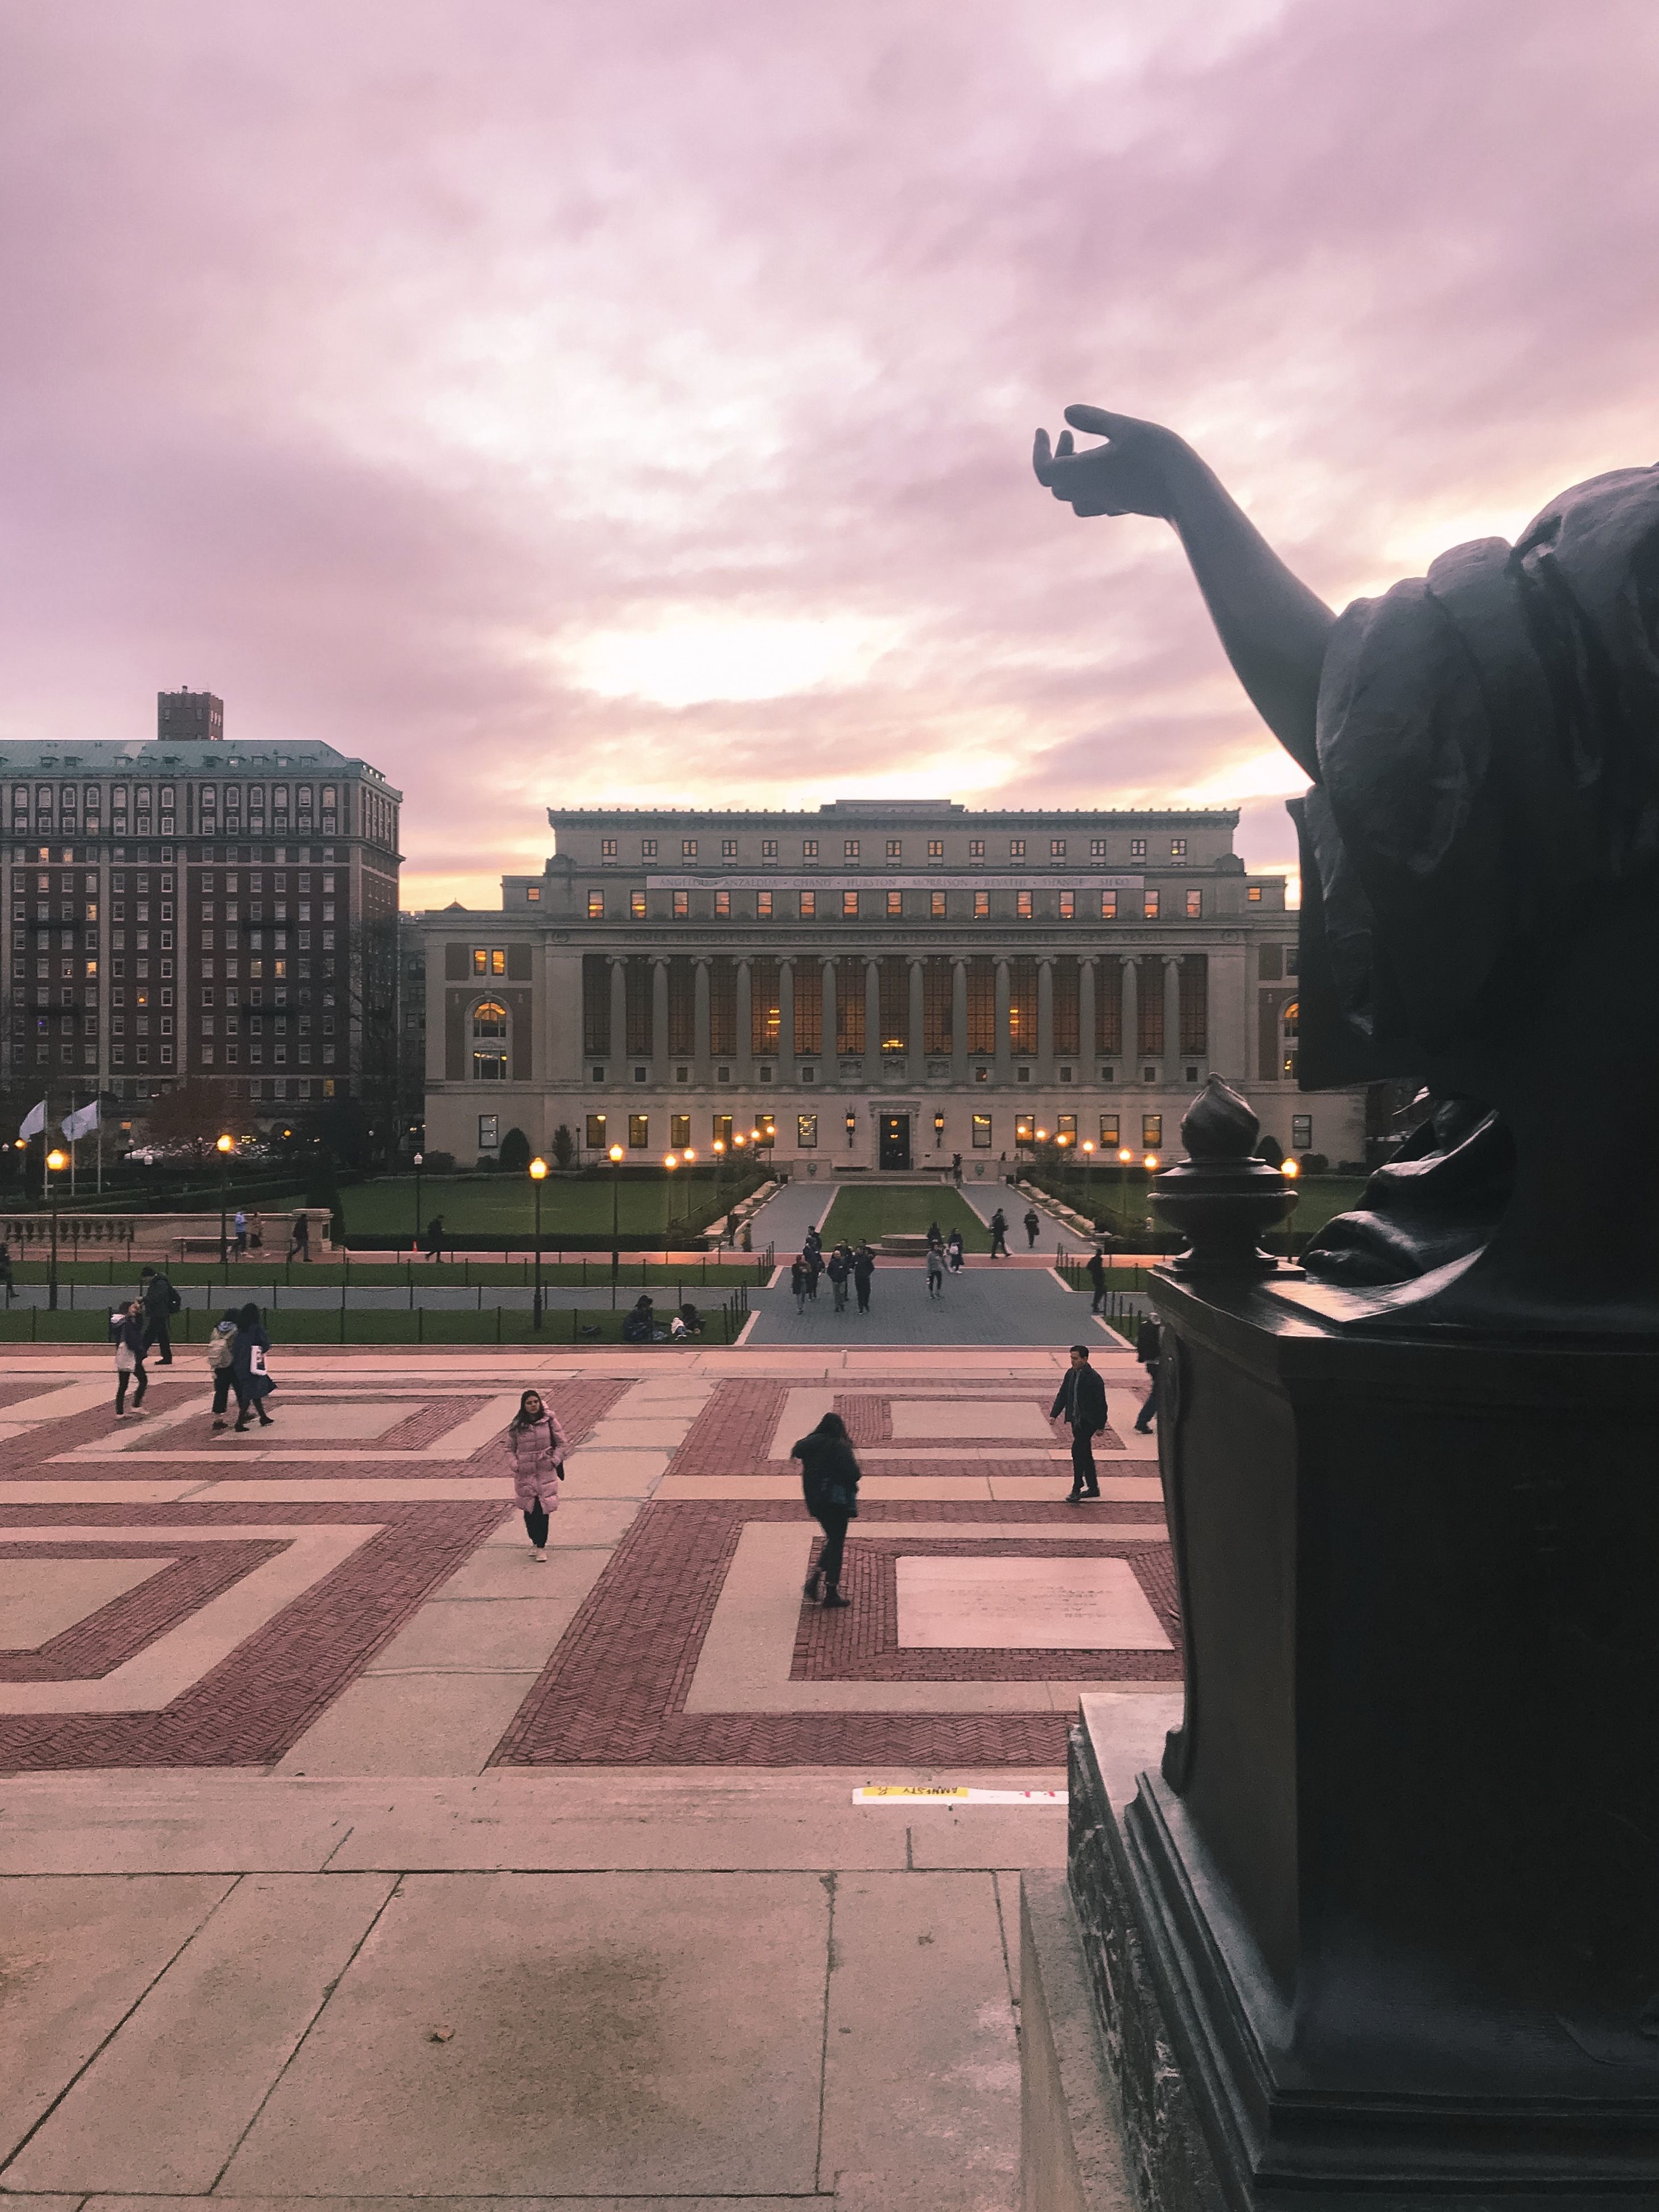 A view of the steps of Columbia University at sunset. - Columbia University